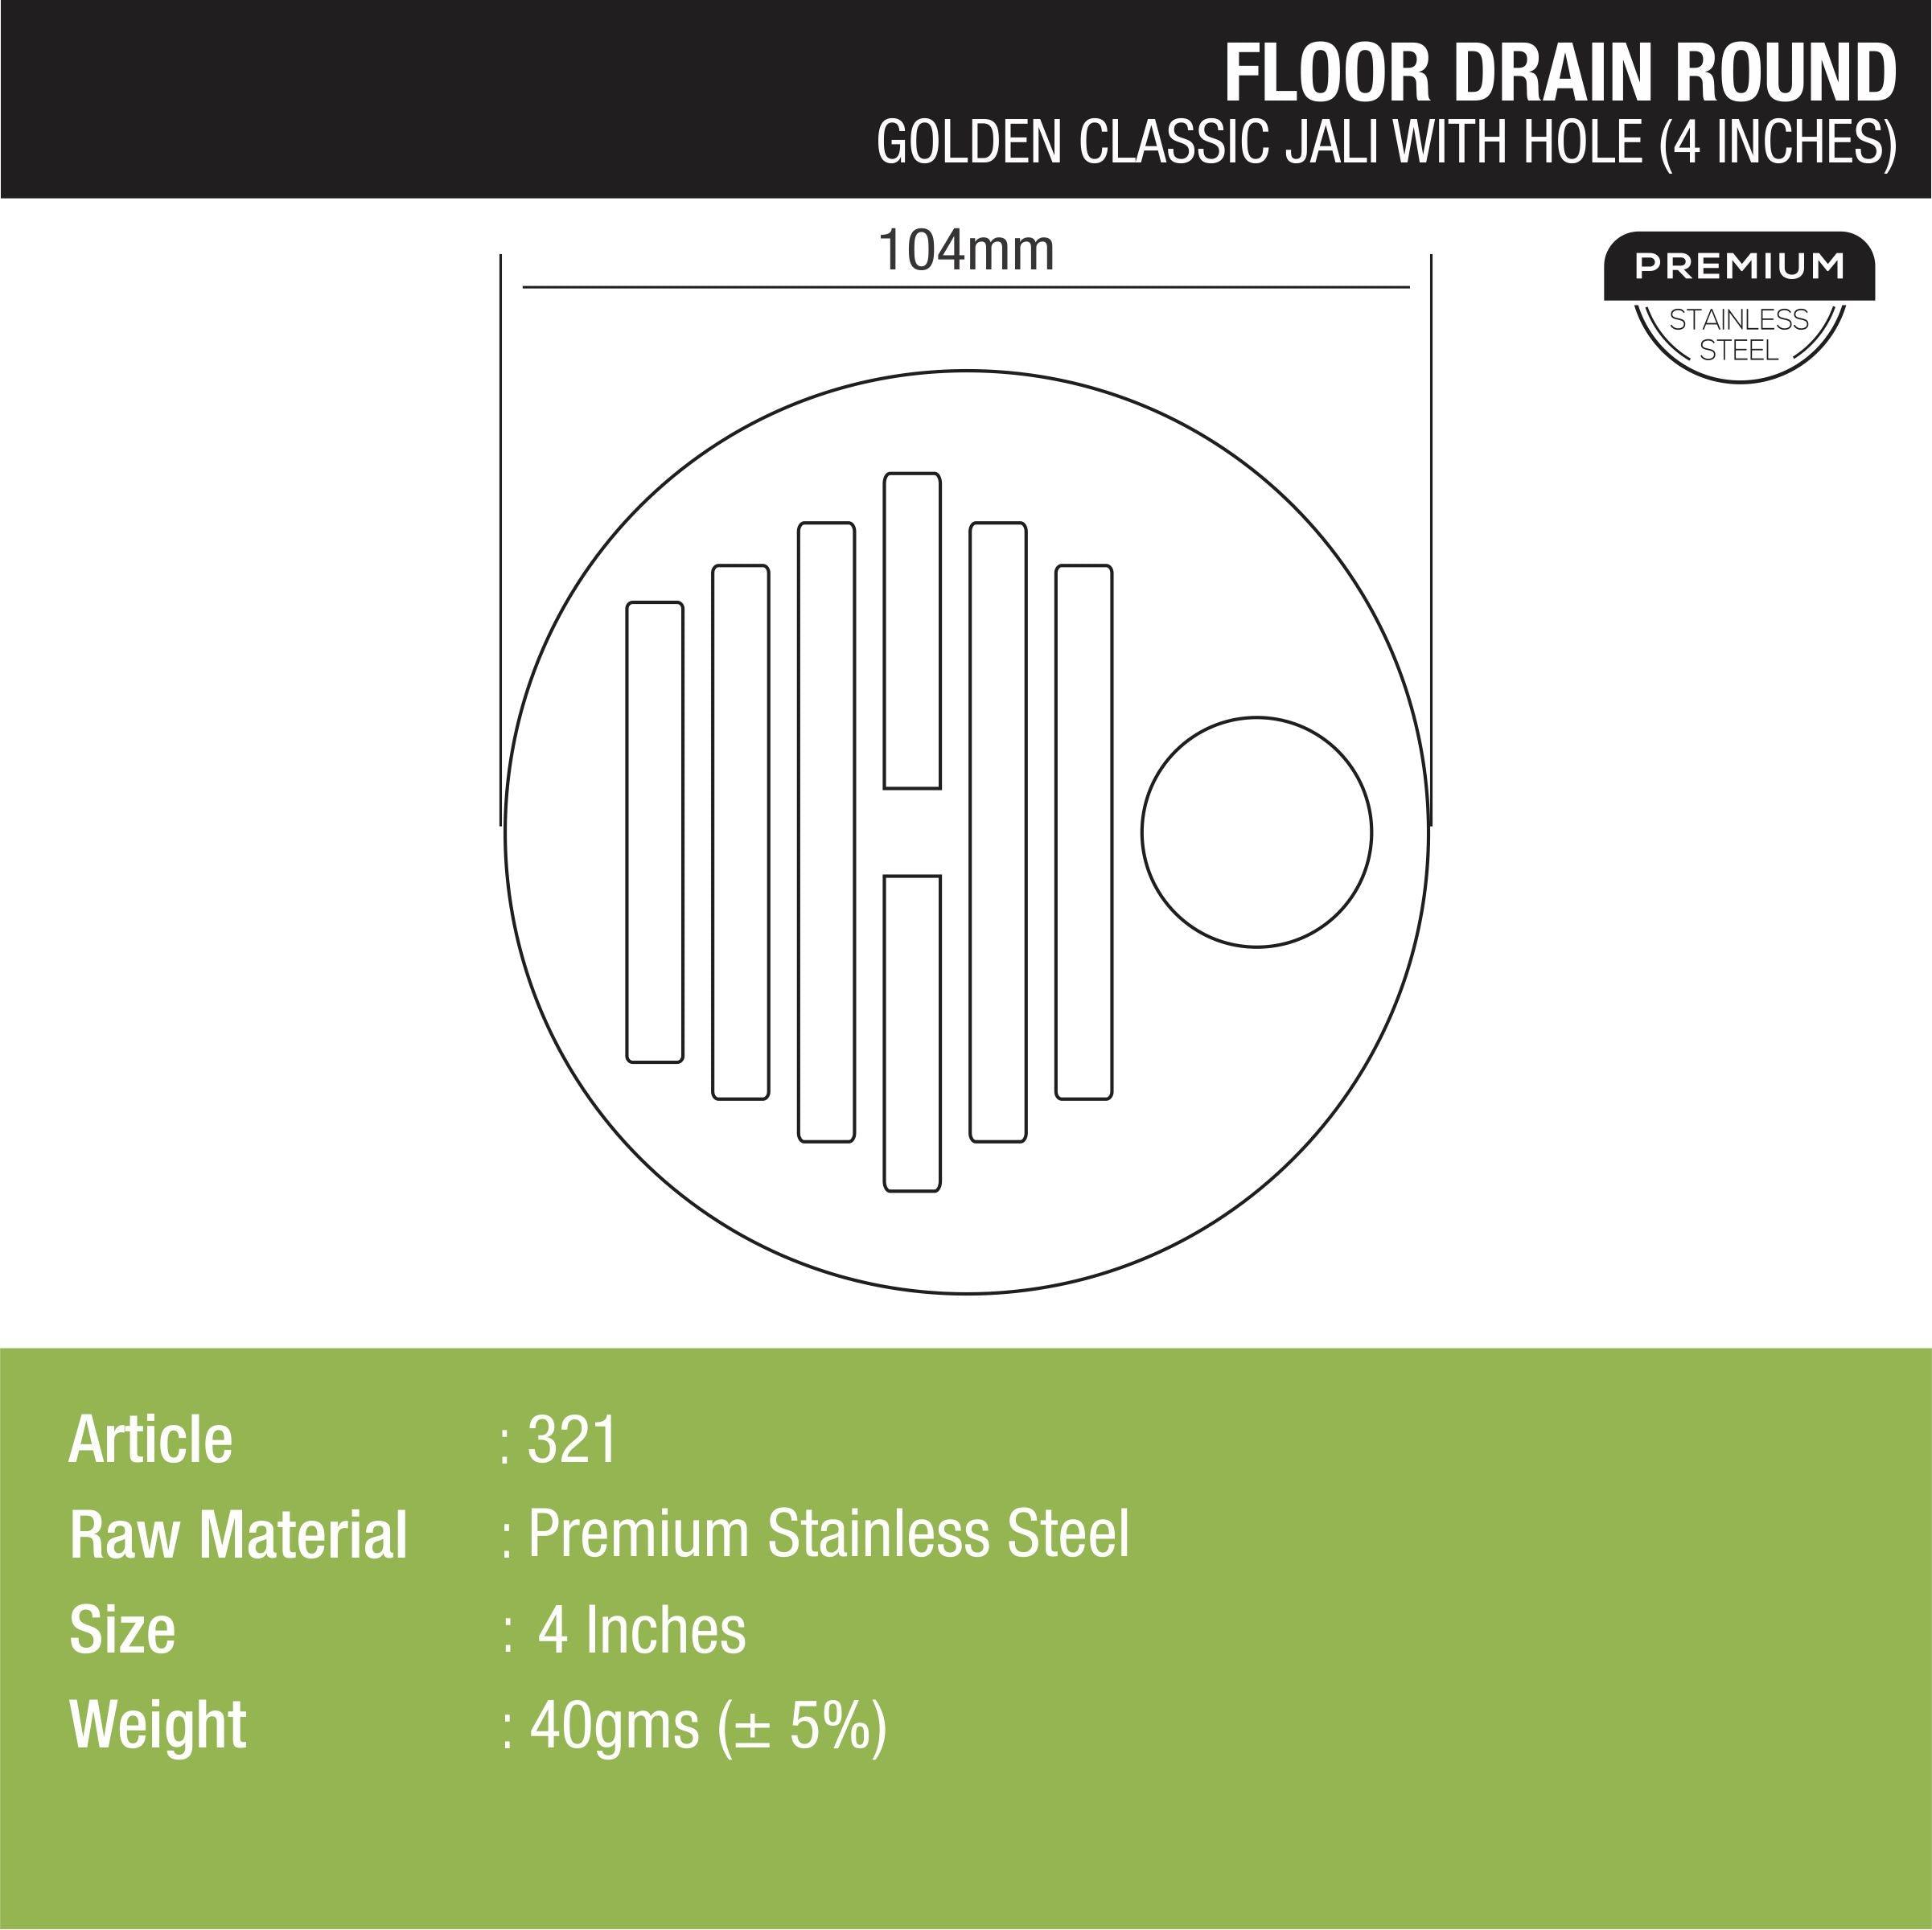 Golden Classic Jali Round Floor Drain with Hole (4 inches) dimensions and sizes